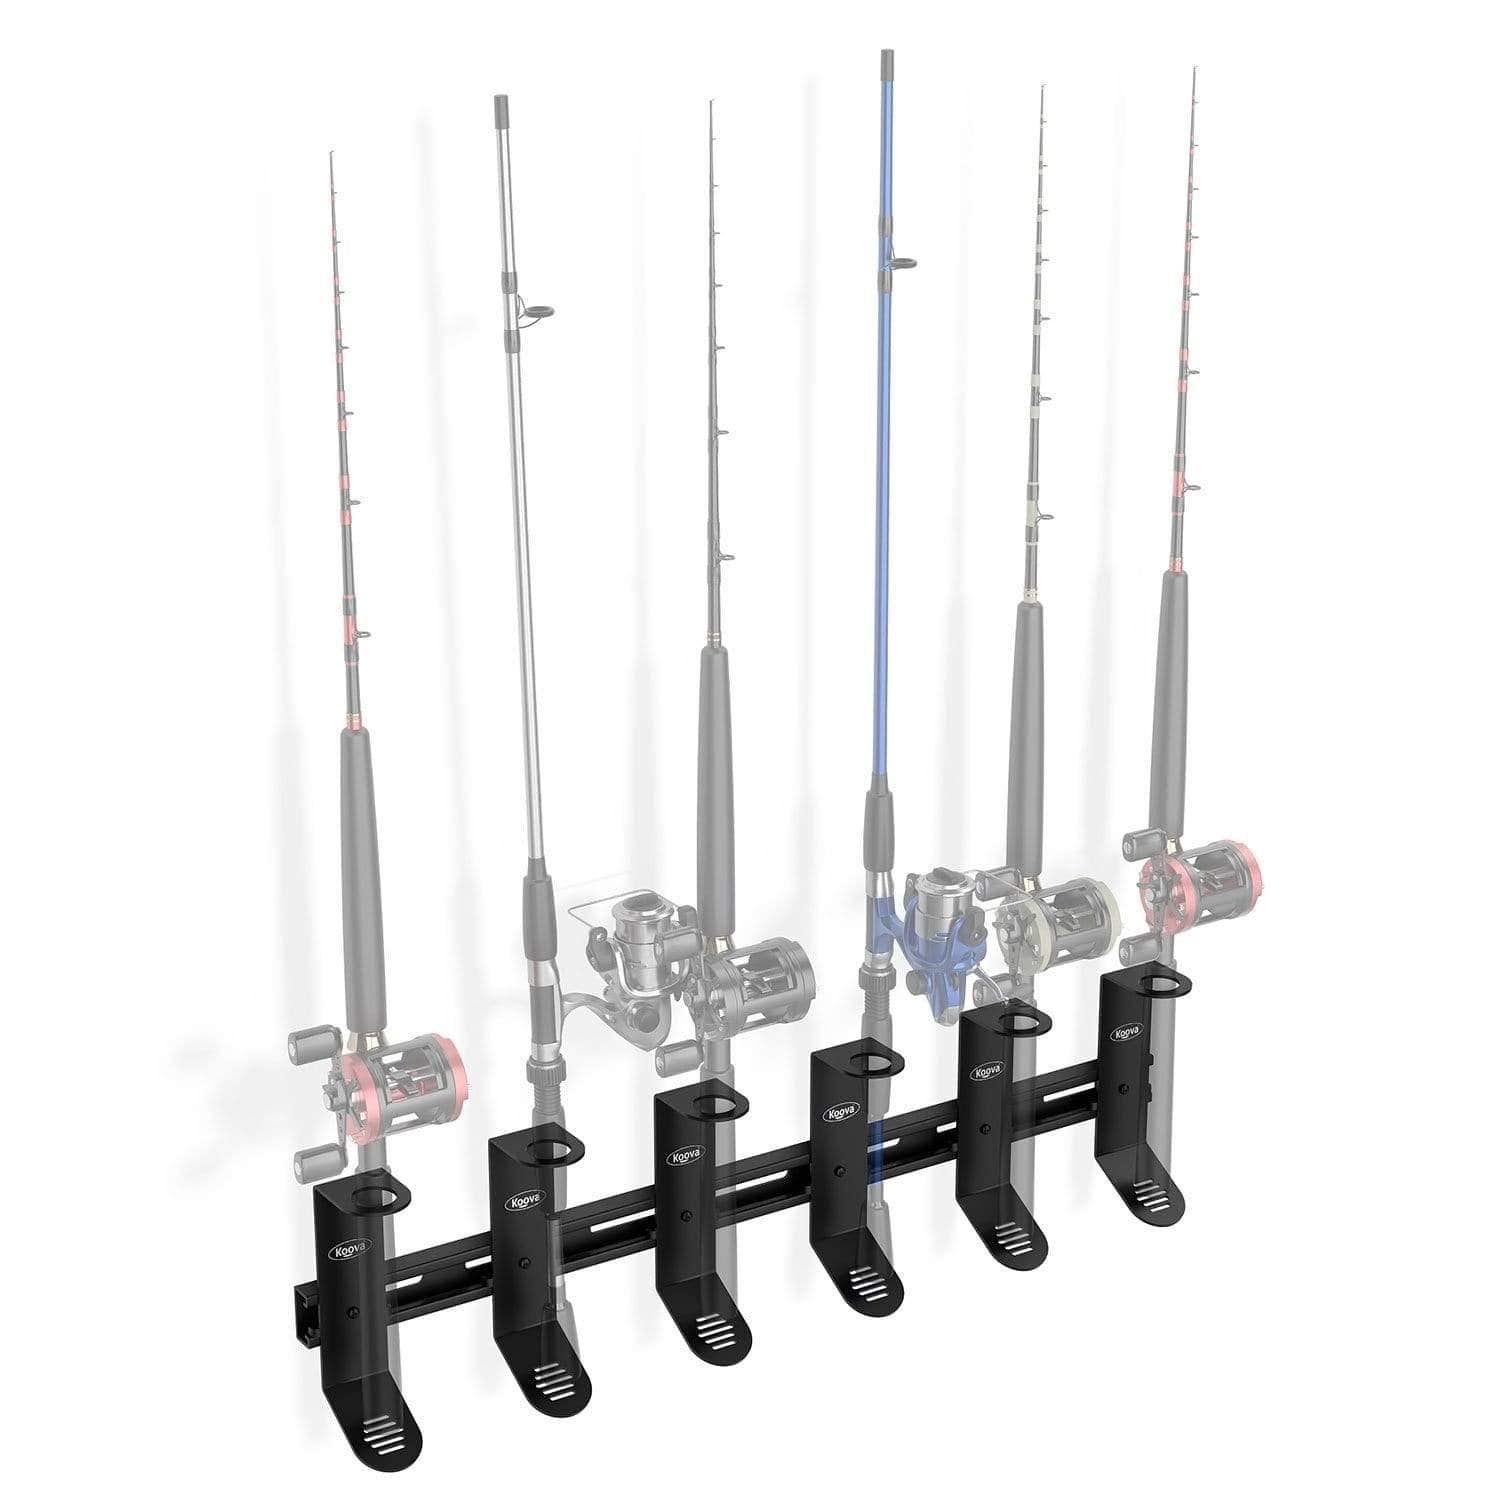 Wall mounted fishing pole holder for spinning fishing poles